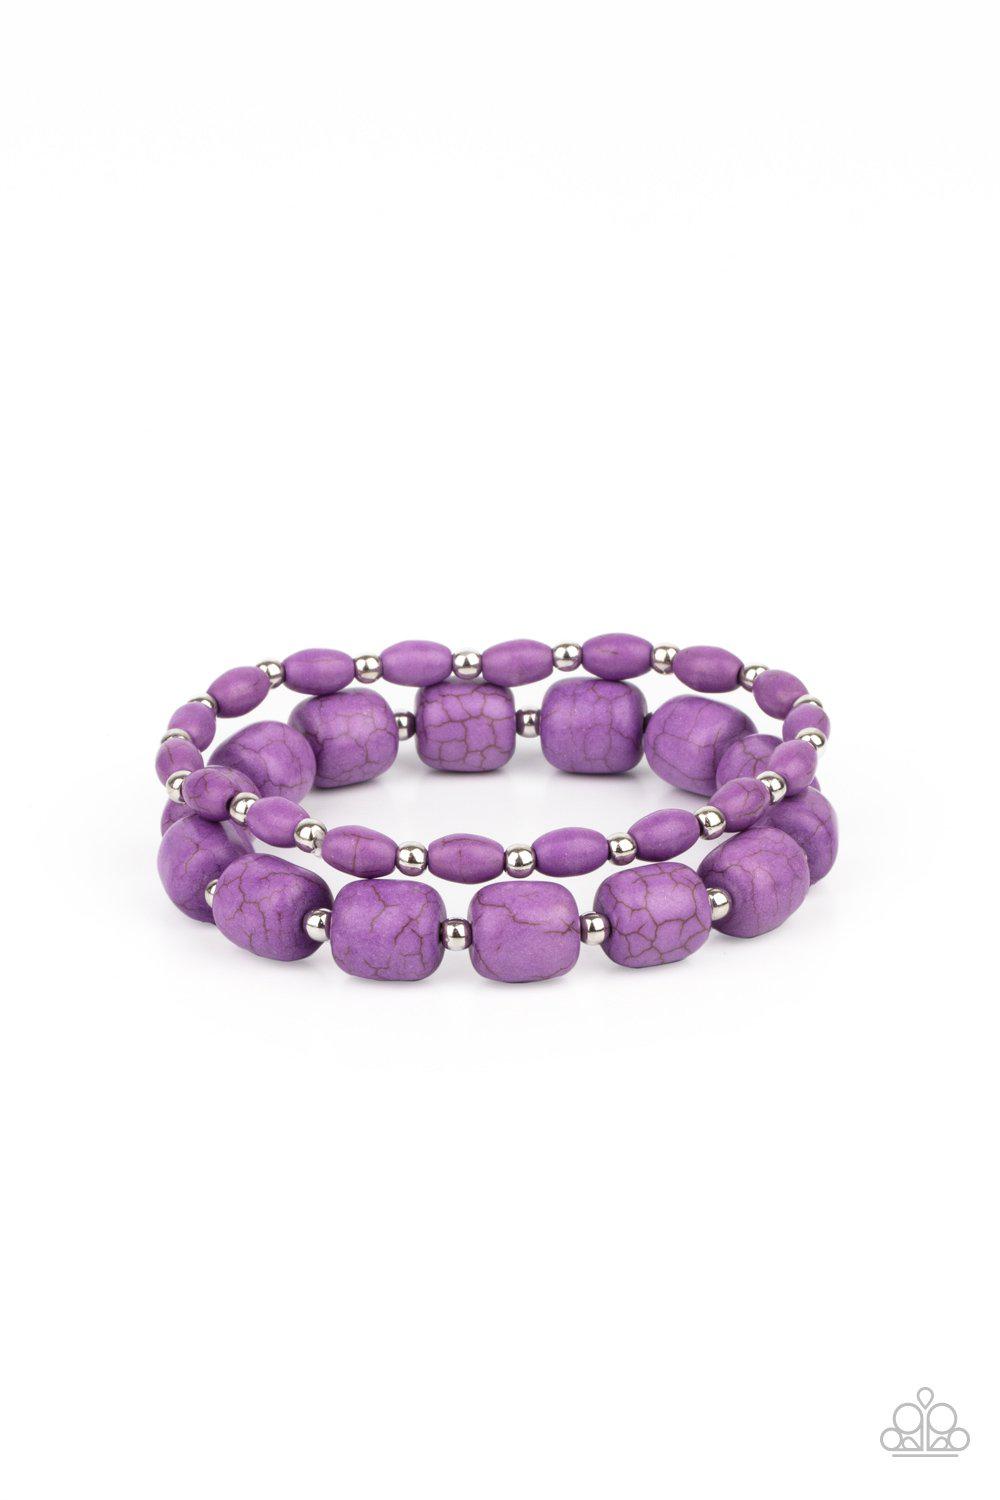 Colorfully Country Purple Stone Bracelet Set - Paparazzi Accessories- lightbox - CarasShop.com - $5 Jewelry by Cara Jewels